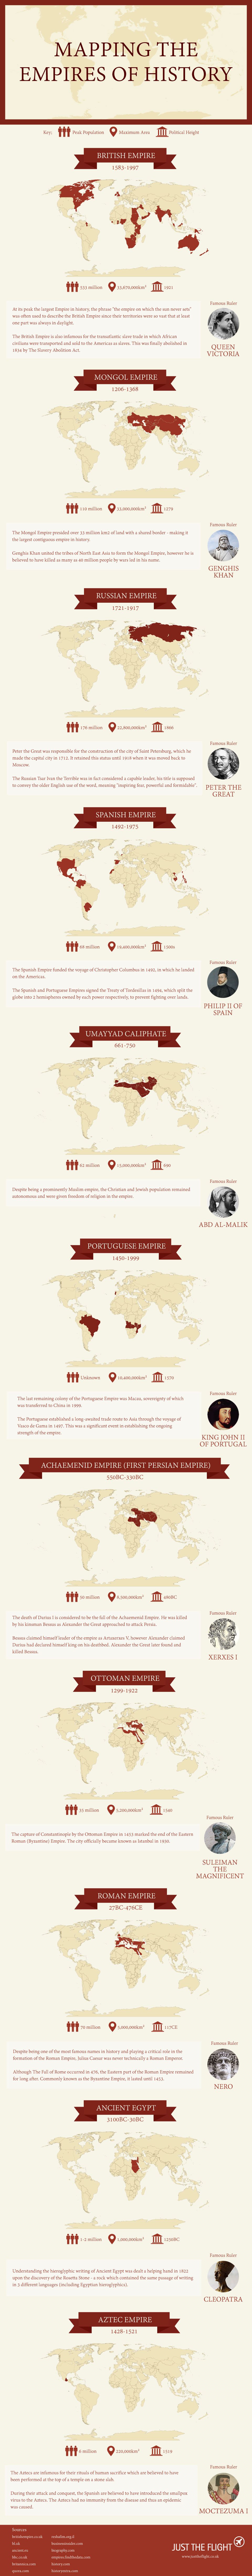 Mapping the Empires of History #Infographic